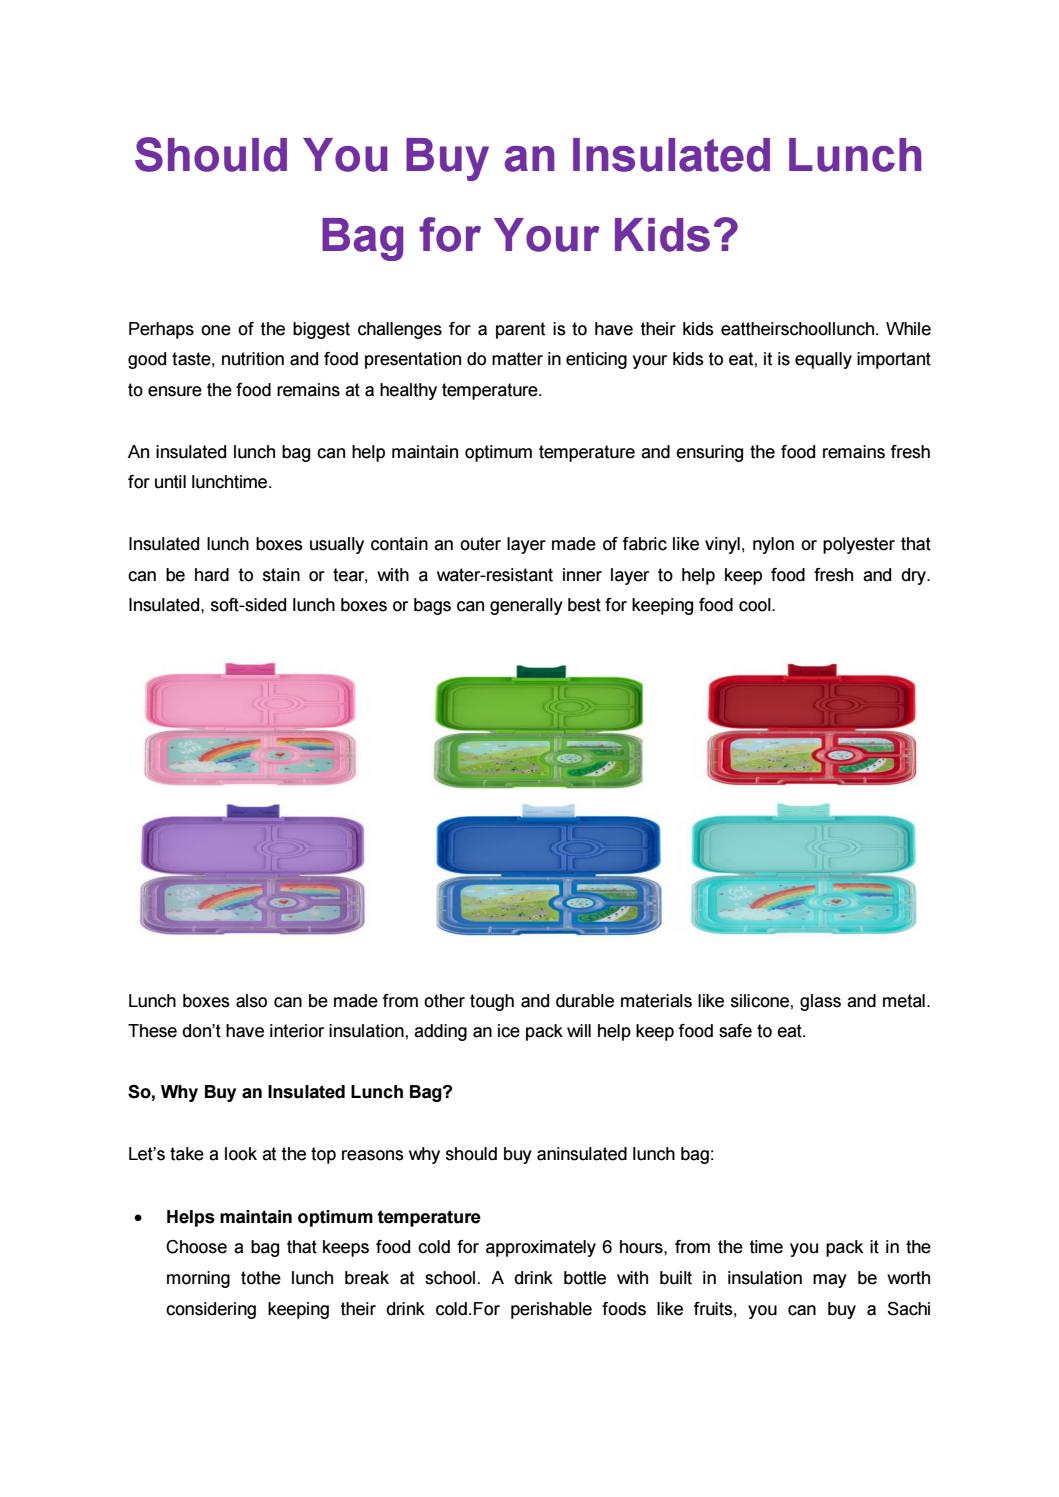 Should You Buy an Insulated Lunch Bag for Your Kids?